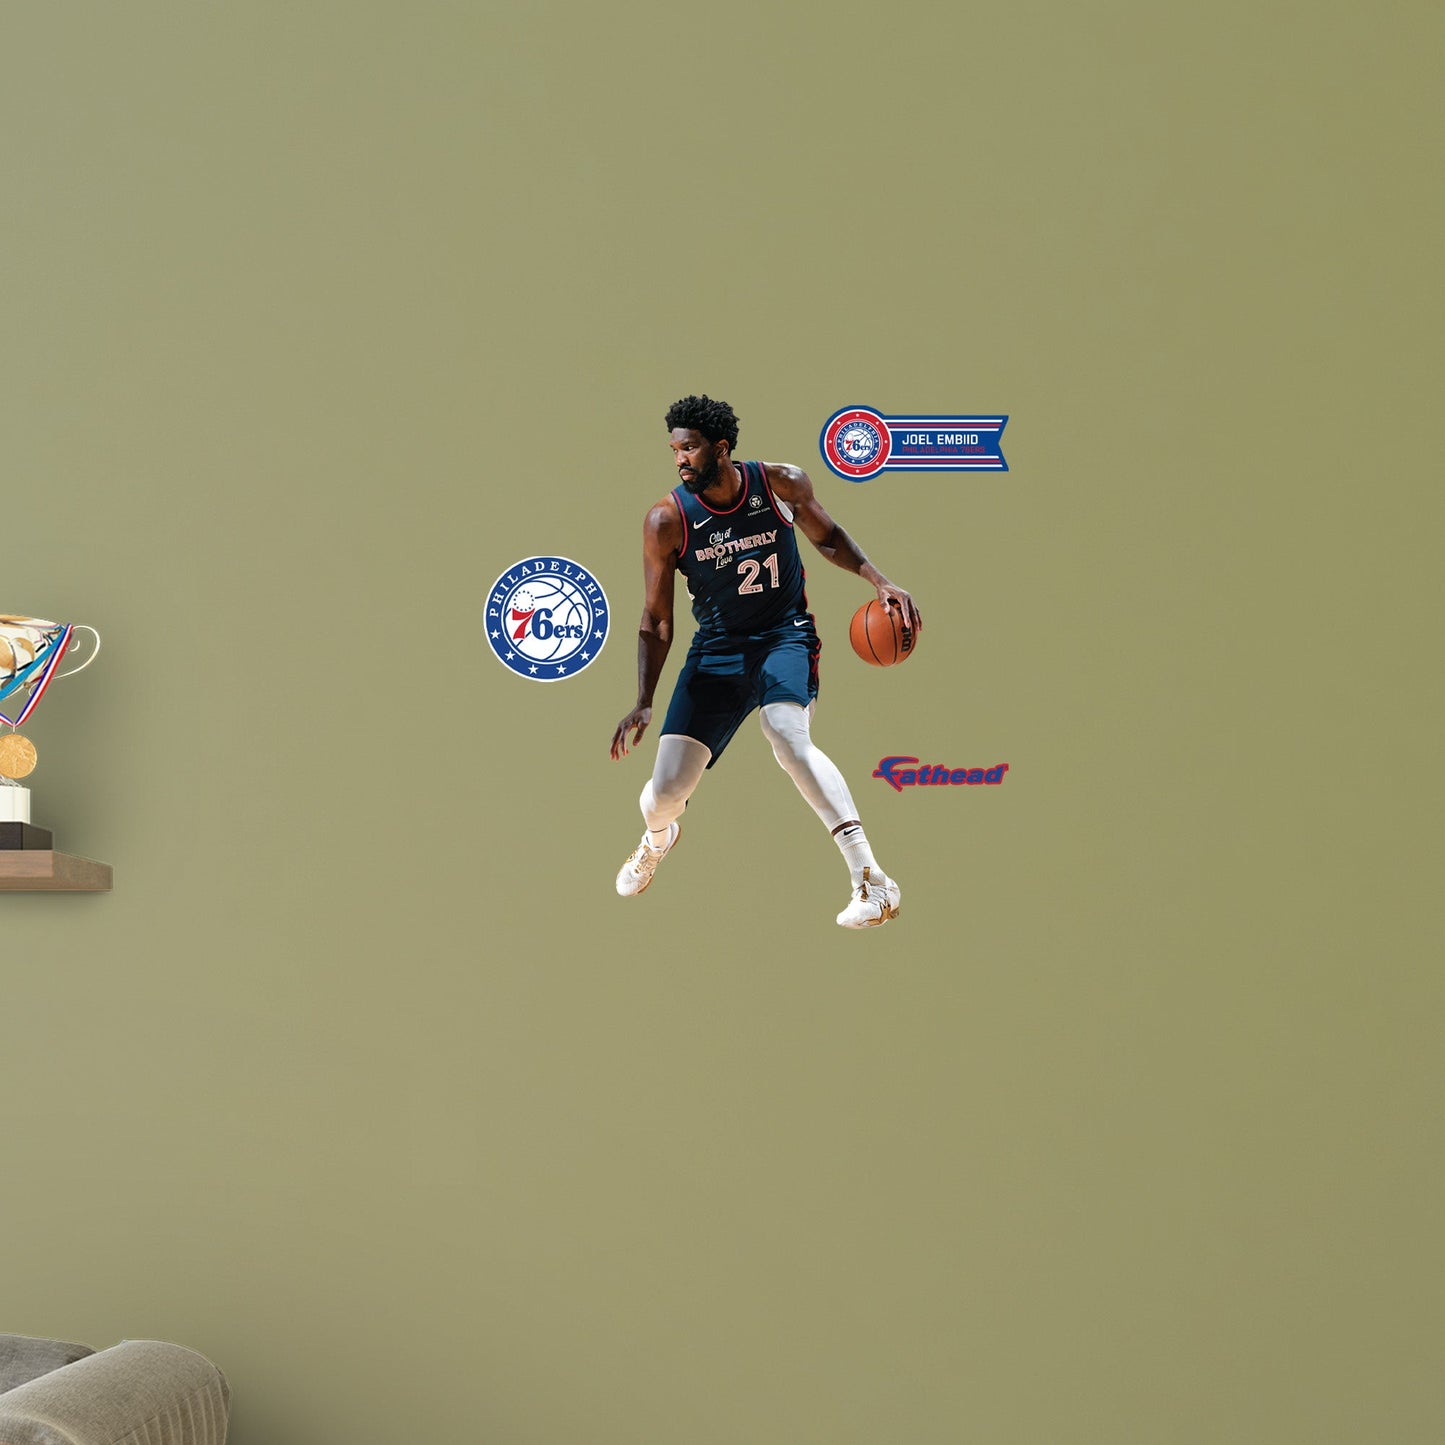 Philadelphia 76ers: Joel Embiid City Jersey        - Officially Licensed NBA Removable     Adhesive Decal